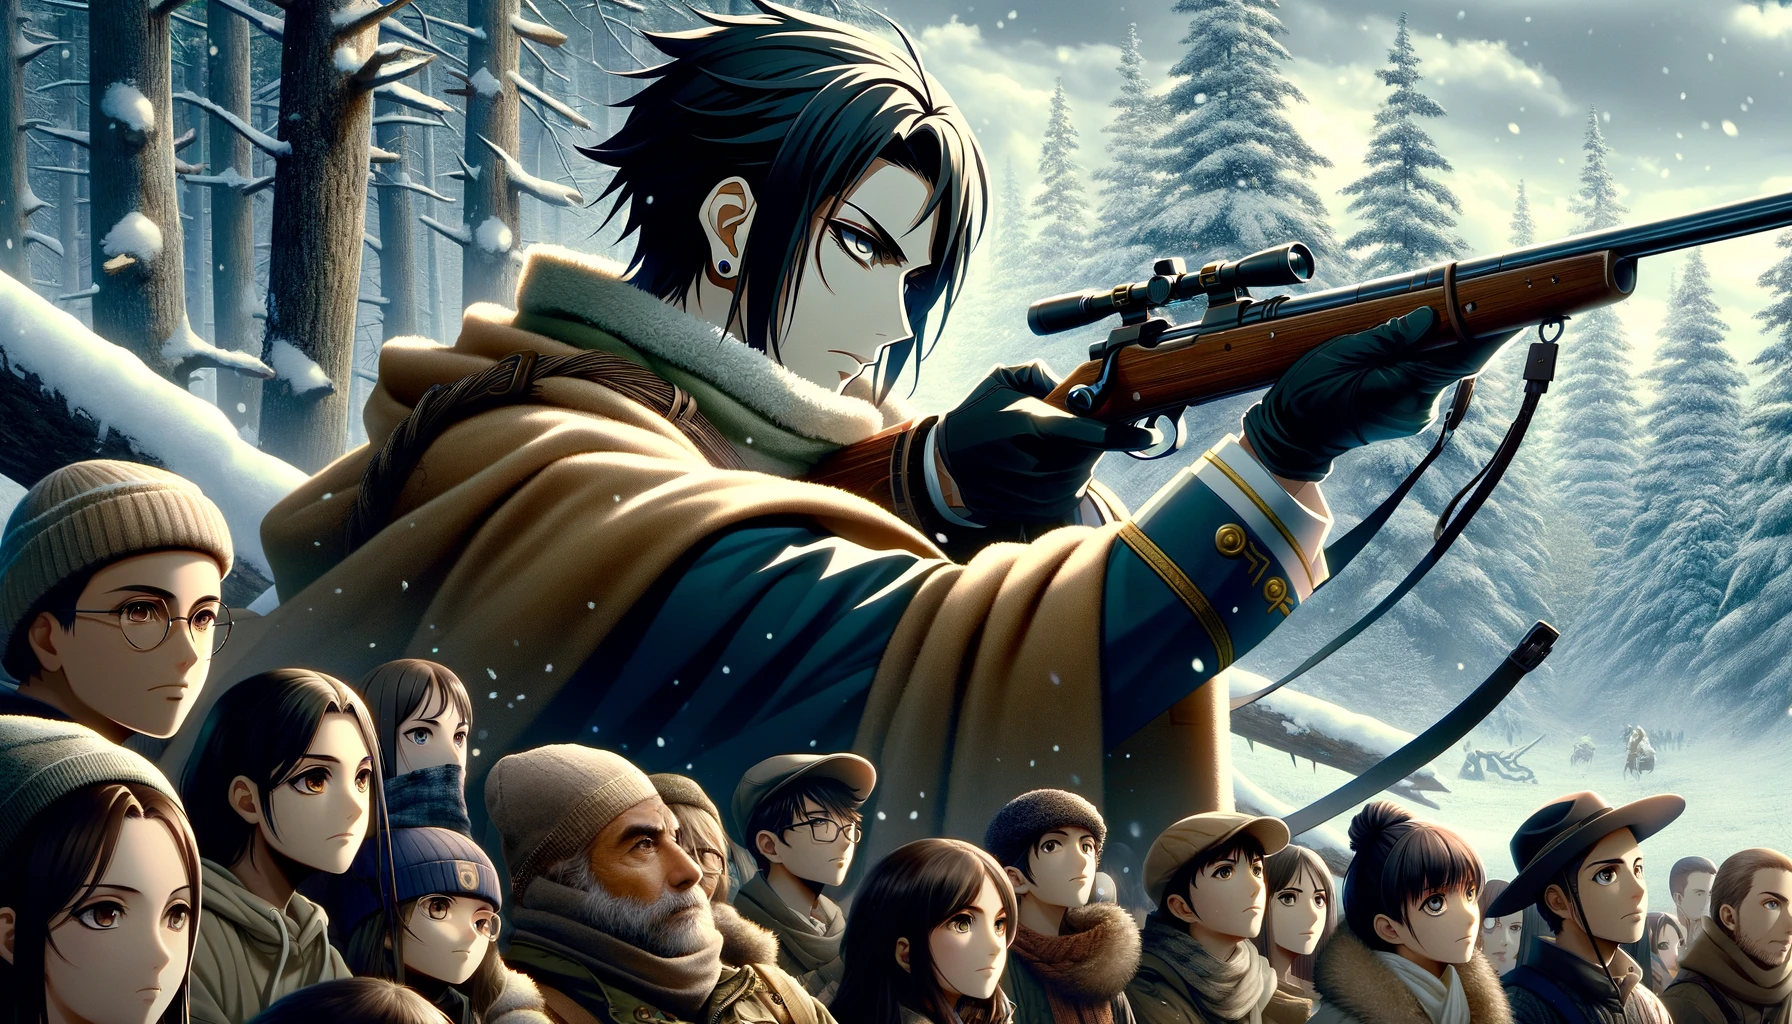 Anime-style image of a charismatic male character resembling Hyakunosuke Ogata from "Golden Kamuy", set in a dramatic wilderness scene. The character is depicted with an intense gaze, a sharpshooter's stance, and wearing a military uniform with a hood. He is surrounded by diverse fans, including young anime enthusiasts, older historical fiction fans, and adventure seekers, all captivated by his presence. The scene captures a blend of action and mystique, set in a snowy forest landscape.